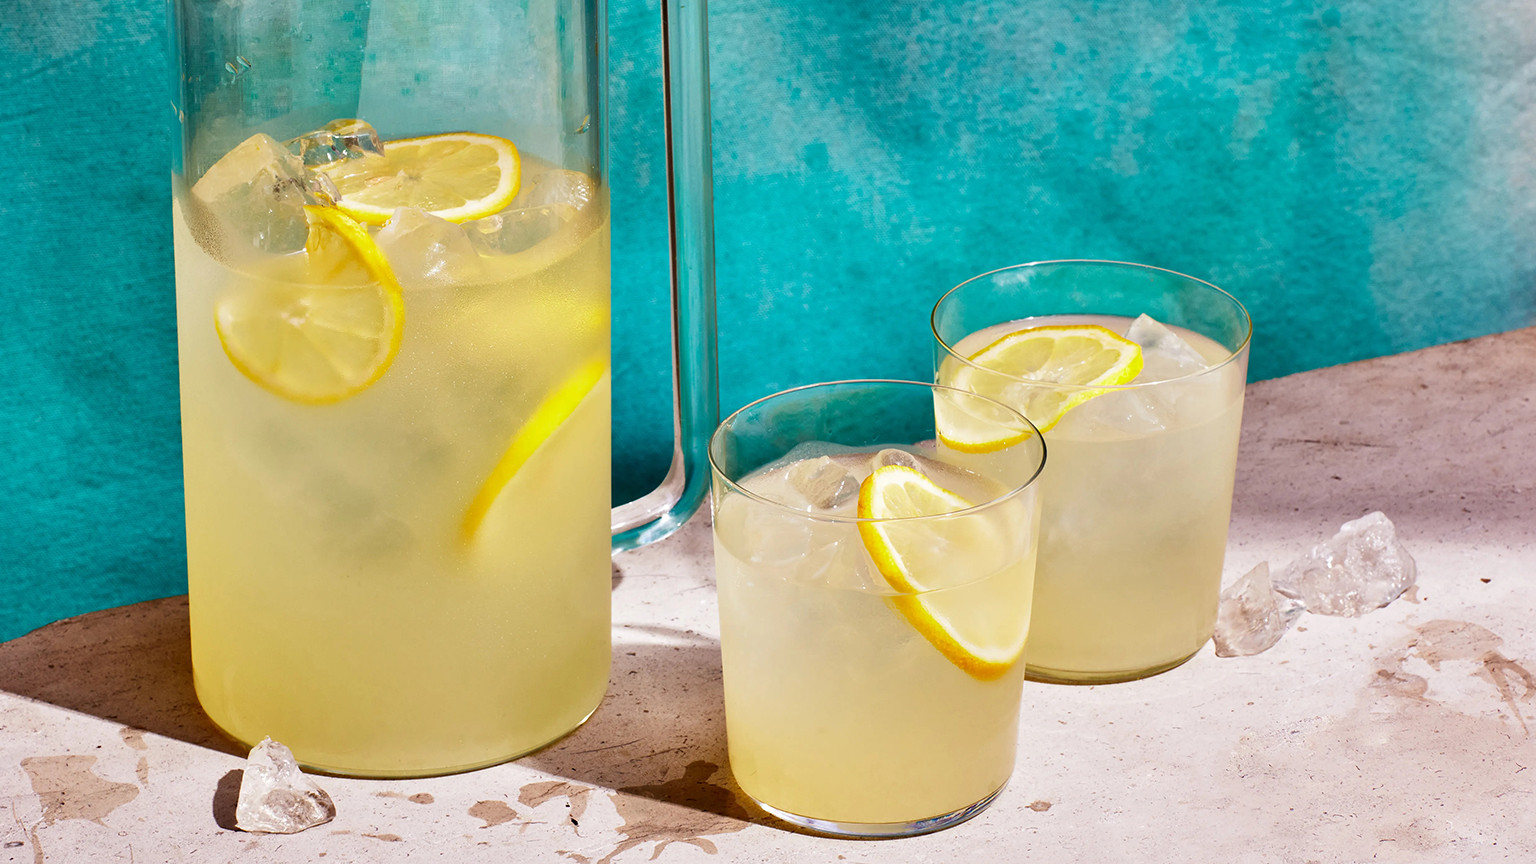 How To Make Lemonade Juice? Do You Know how To Prepare to Do That?